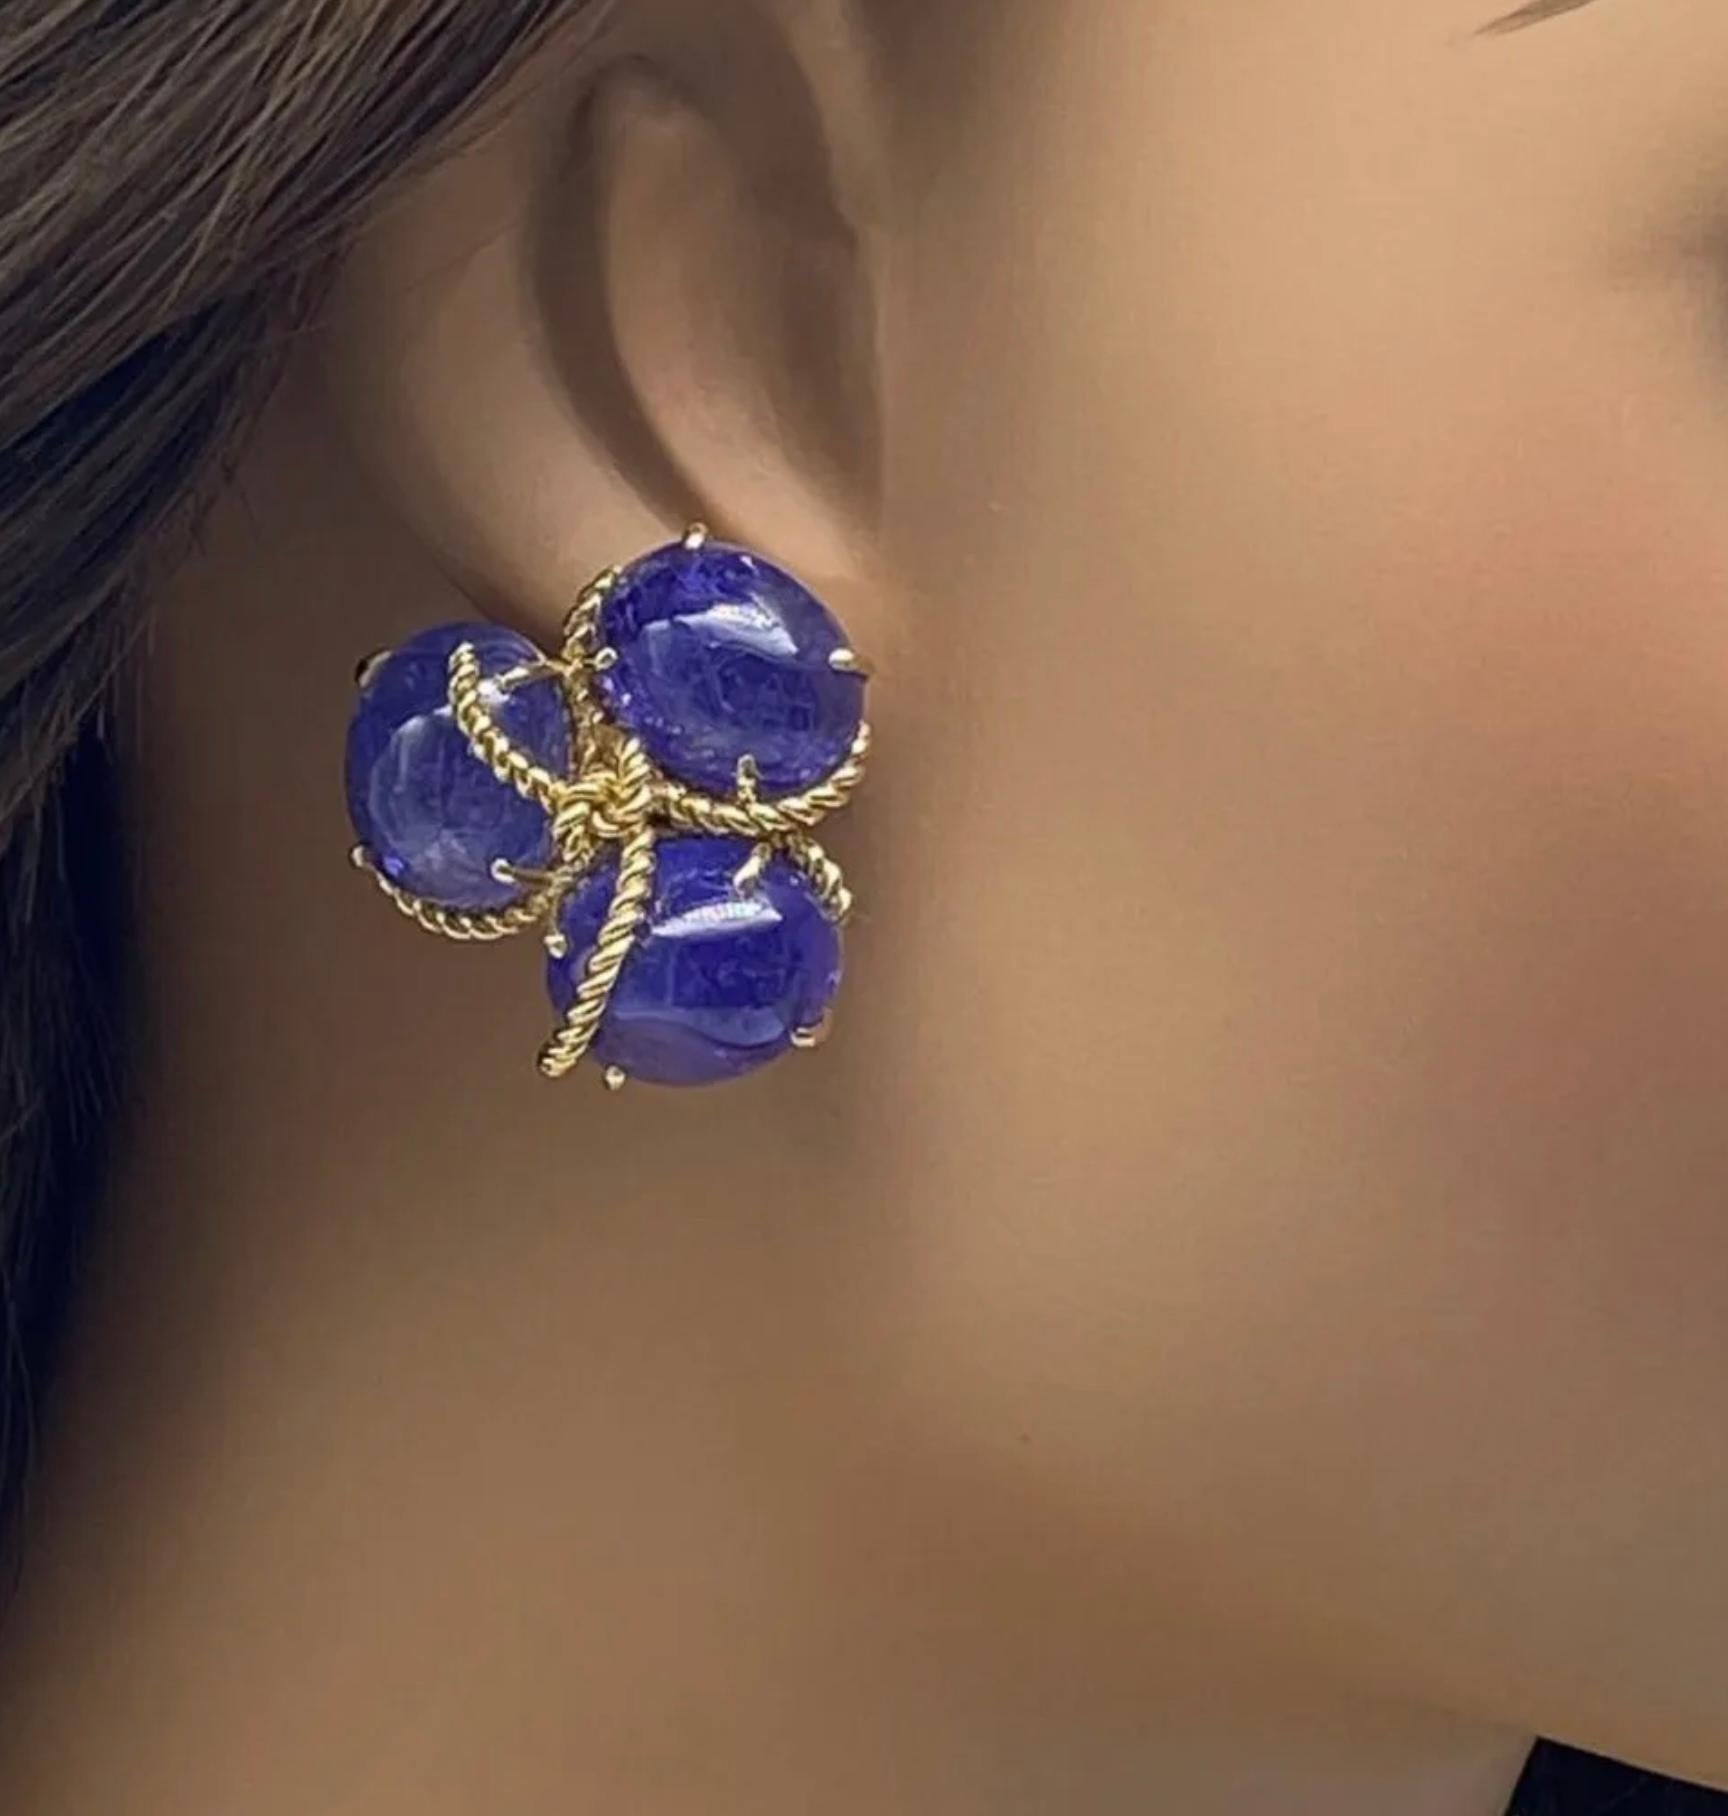 Verdura Polished Stone Tanzanite & 18k Rope Gold Clip On Earrings.

Verdura Tanzanite & 18k Gold Earrings Clip On Style - 1 1/4”. Polished stones in rope like gold pattern - described by Verdura as “beautiful polished pebbles, fished from the bottom